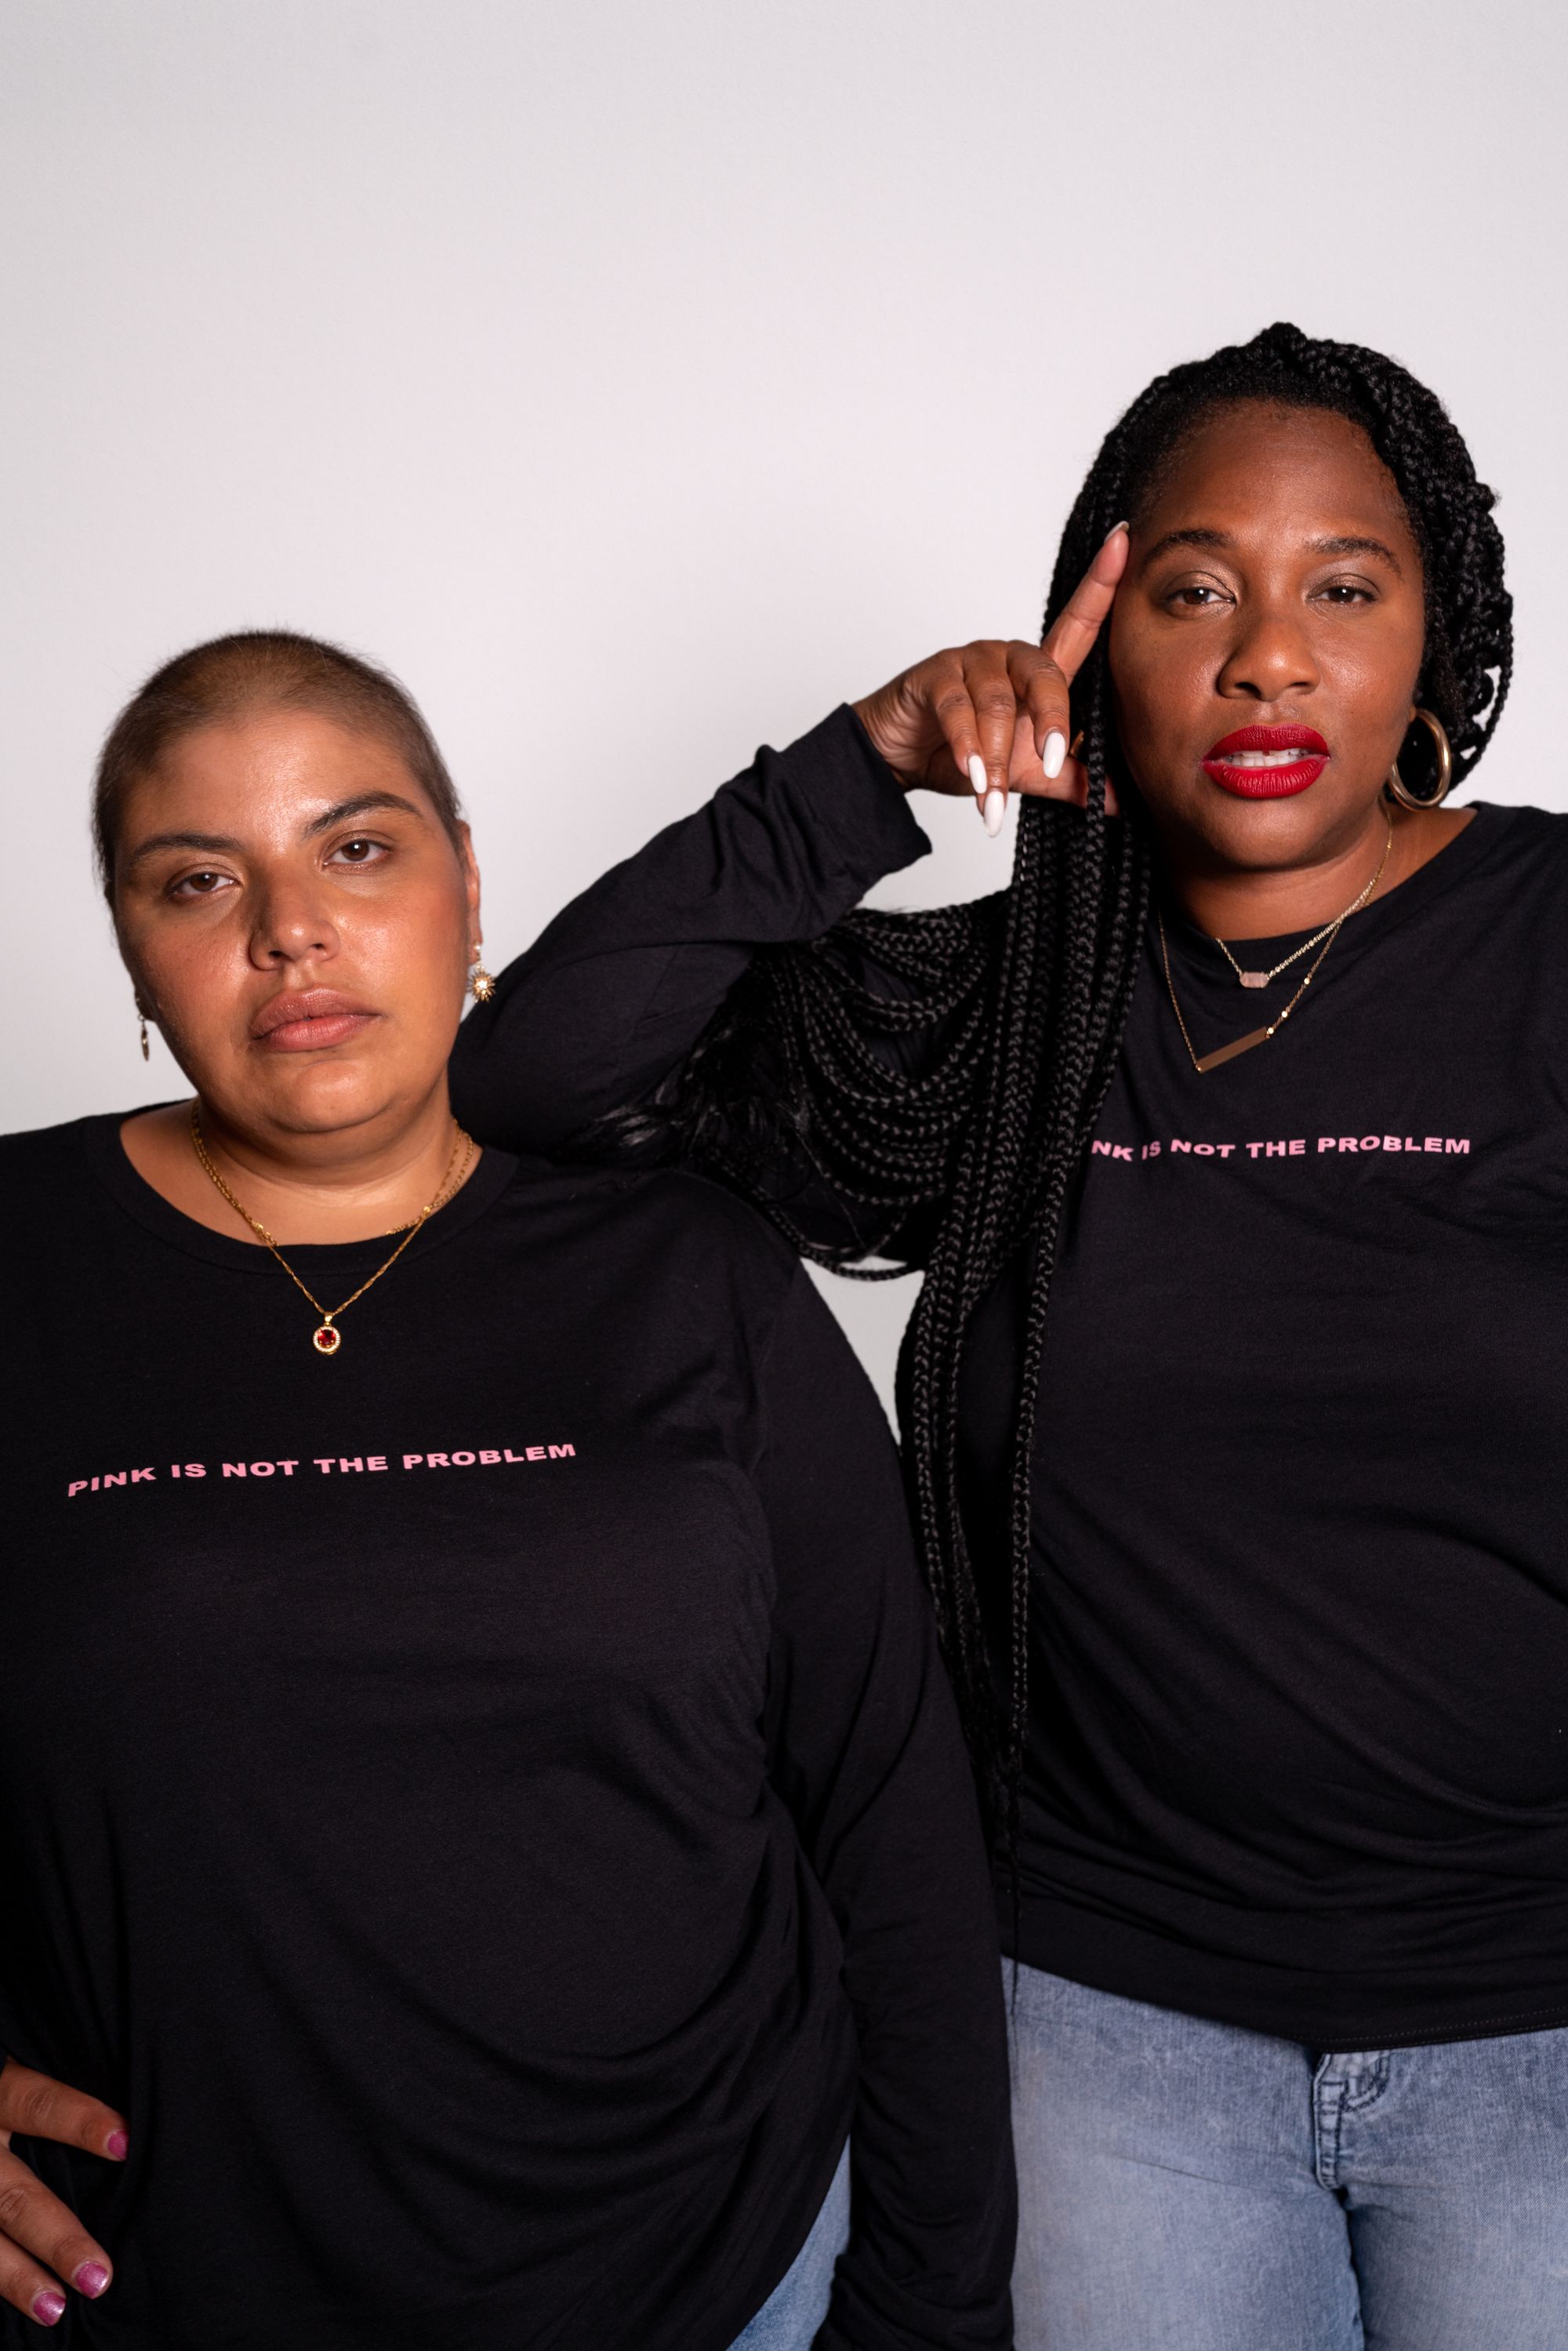 Pink Is Not The Problem Campaign Features Community Members' Real-Life Experiences of Pinkwashing